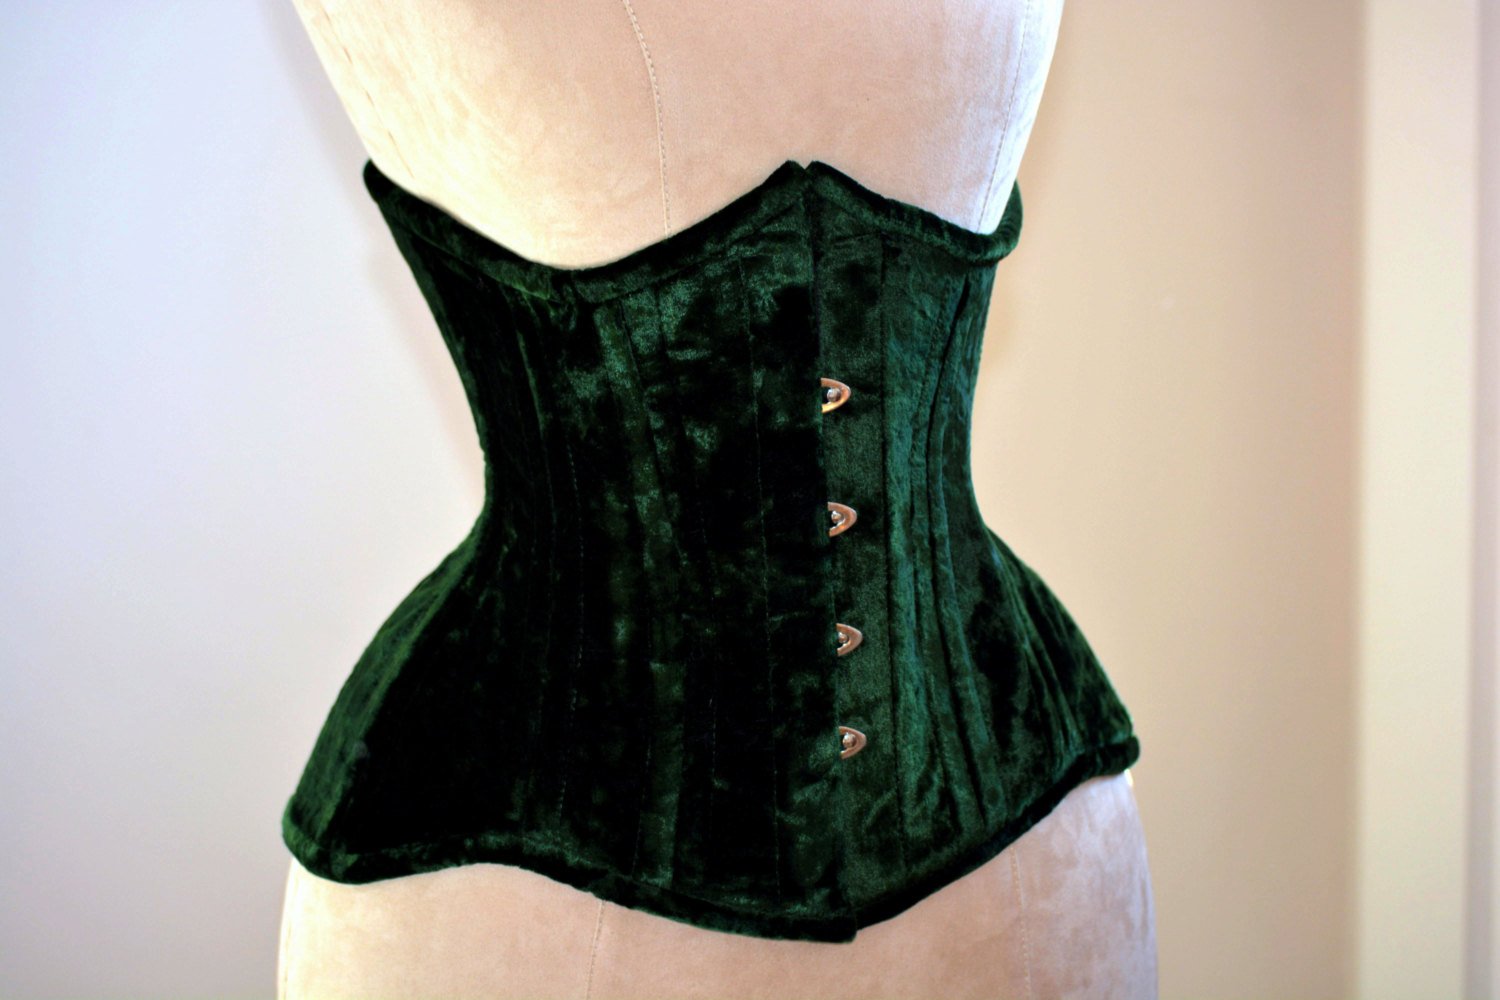 Real double row steel boned underbust corset from cotton. Waist